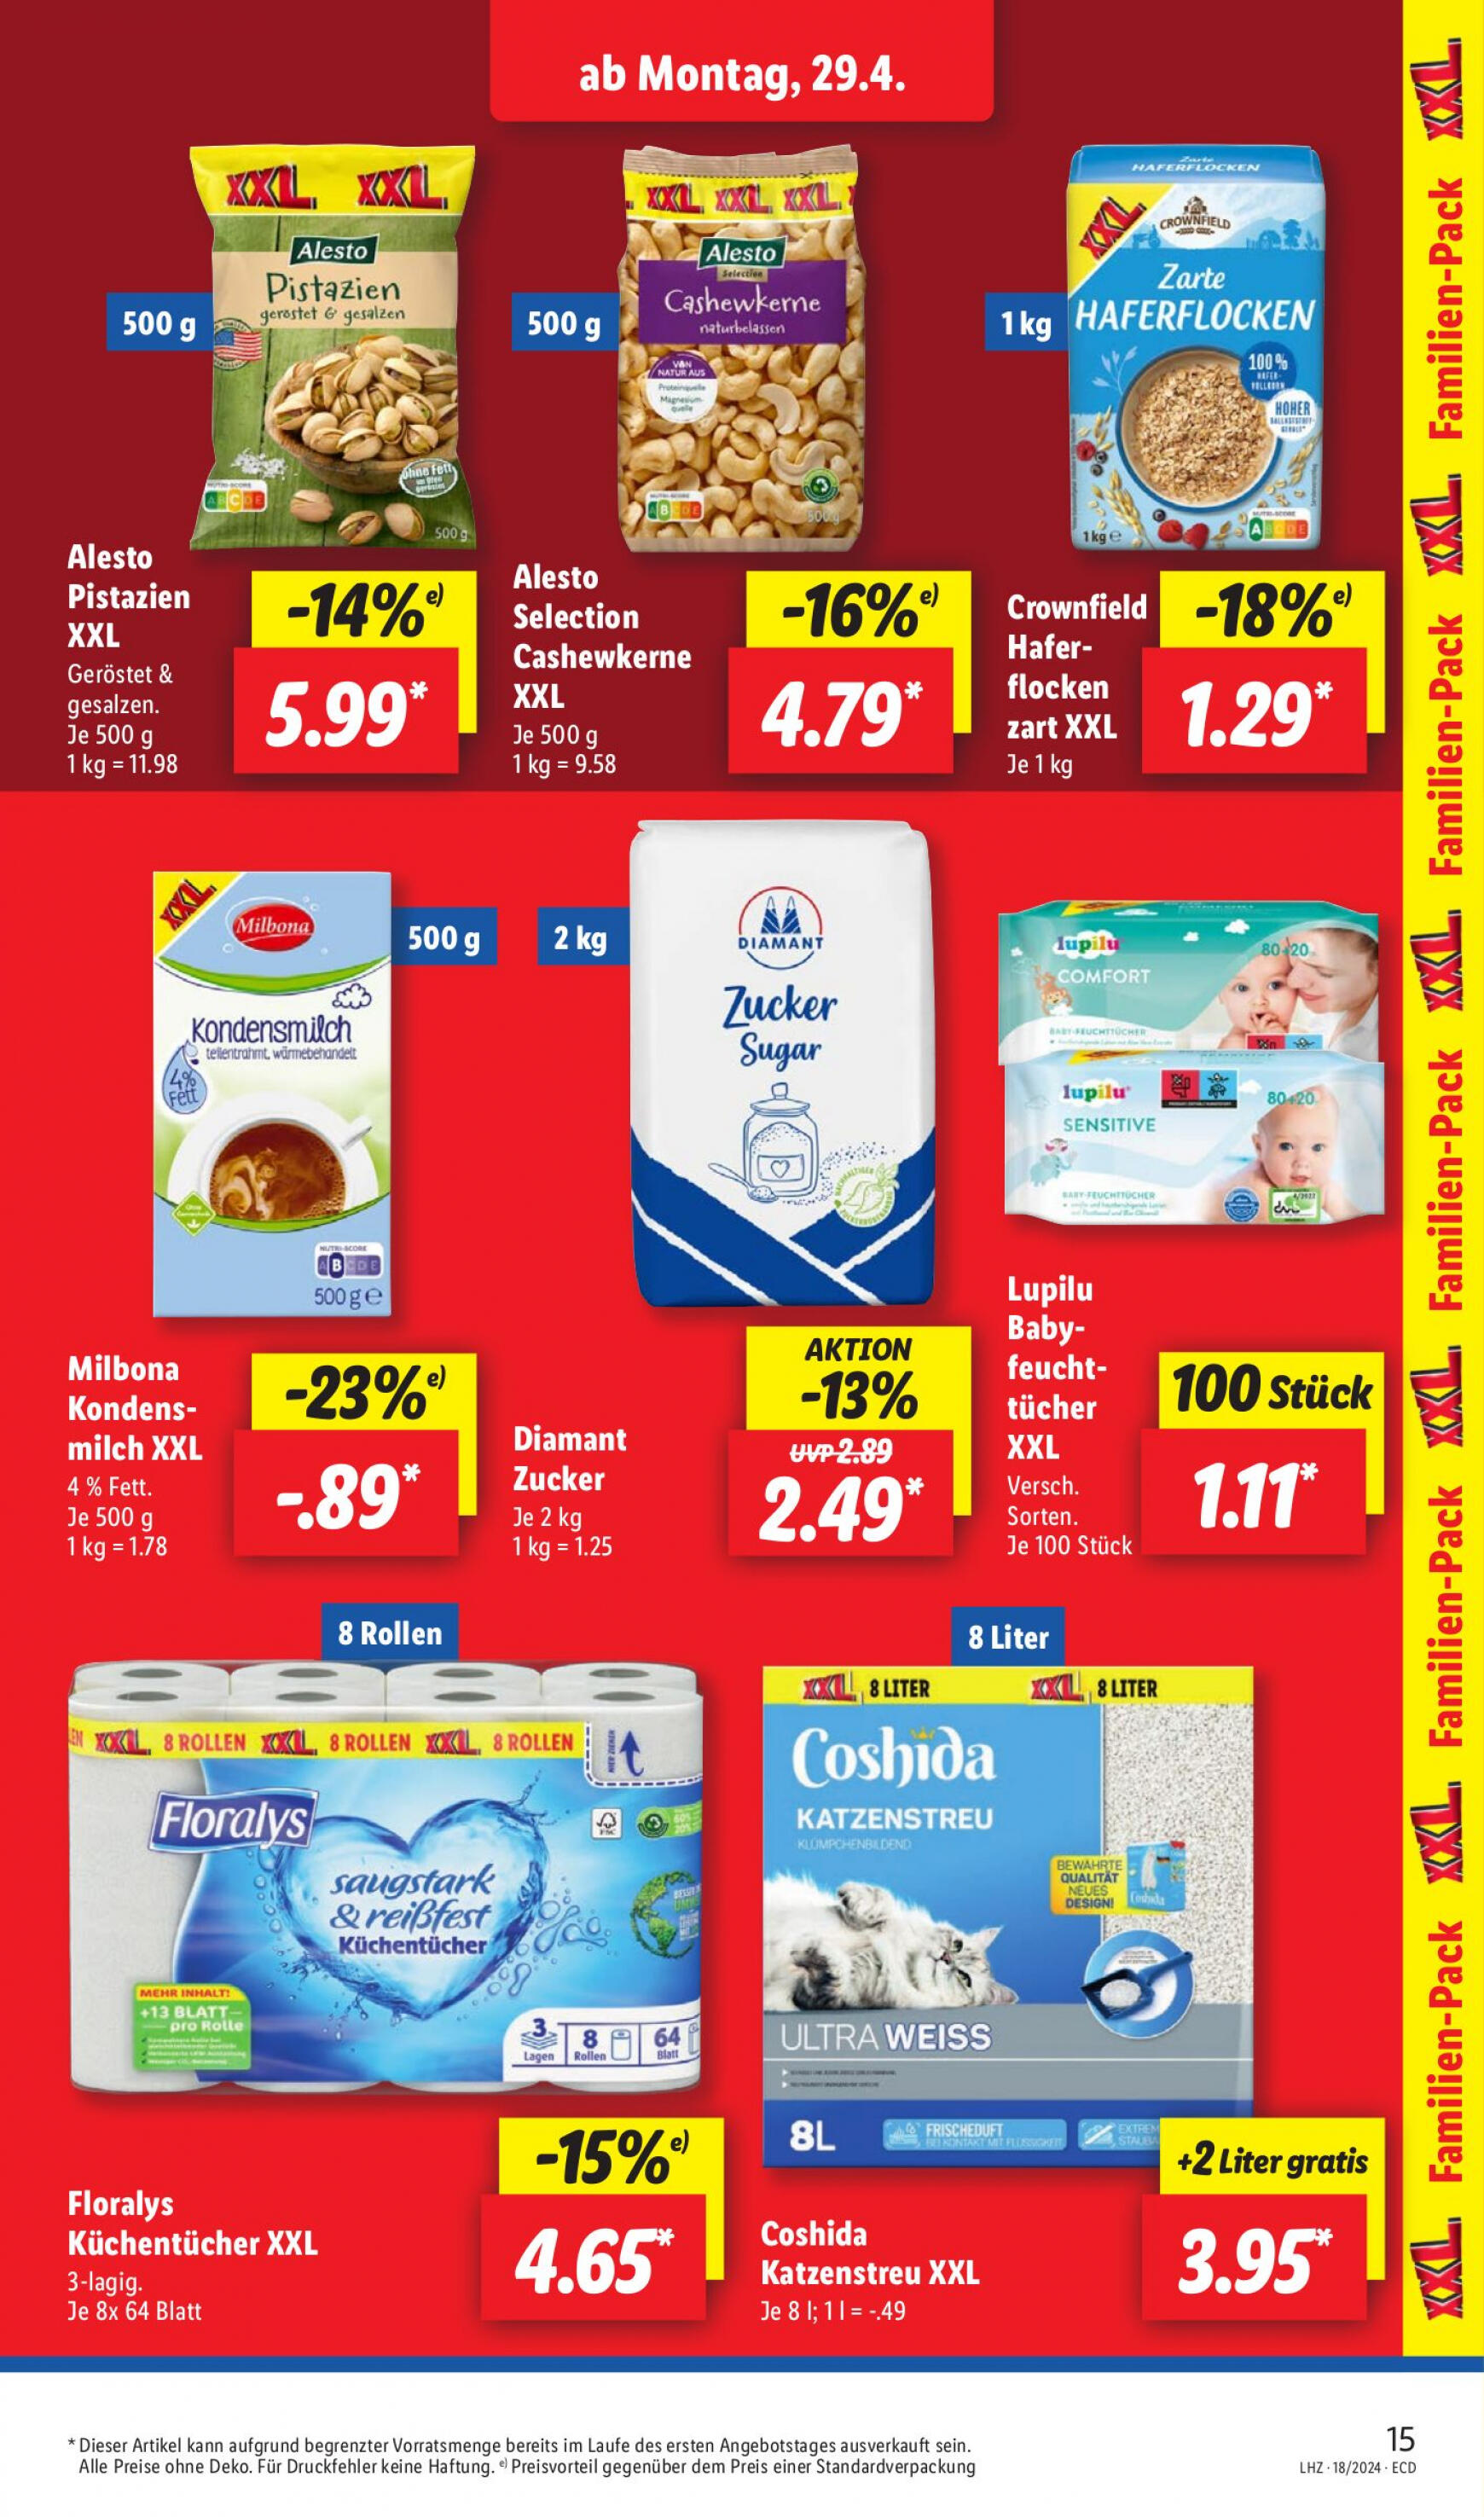 lidl - Flyer Lidl aktuell 29.04. - 04.05. - page: 19